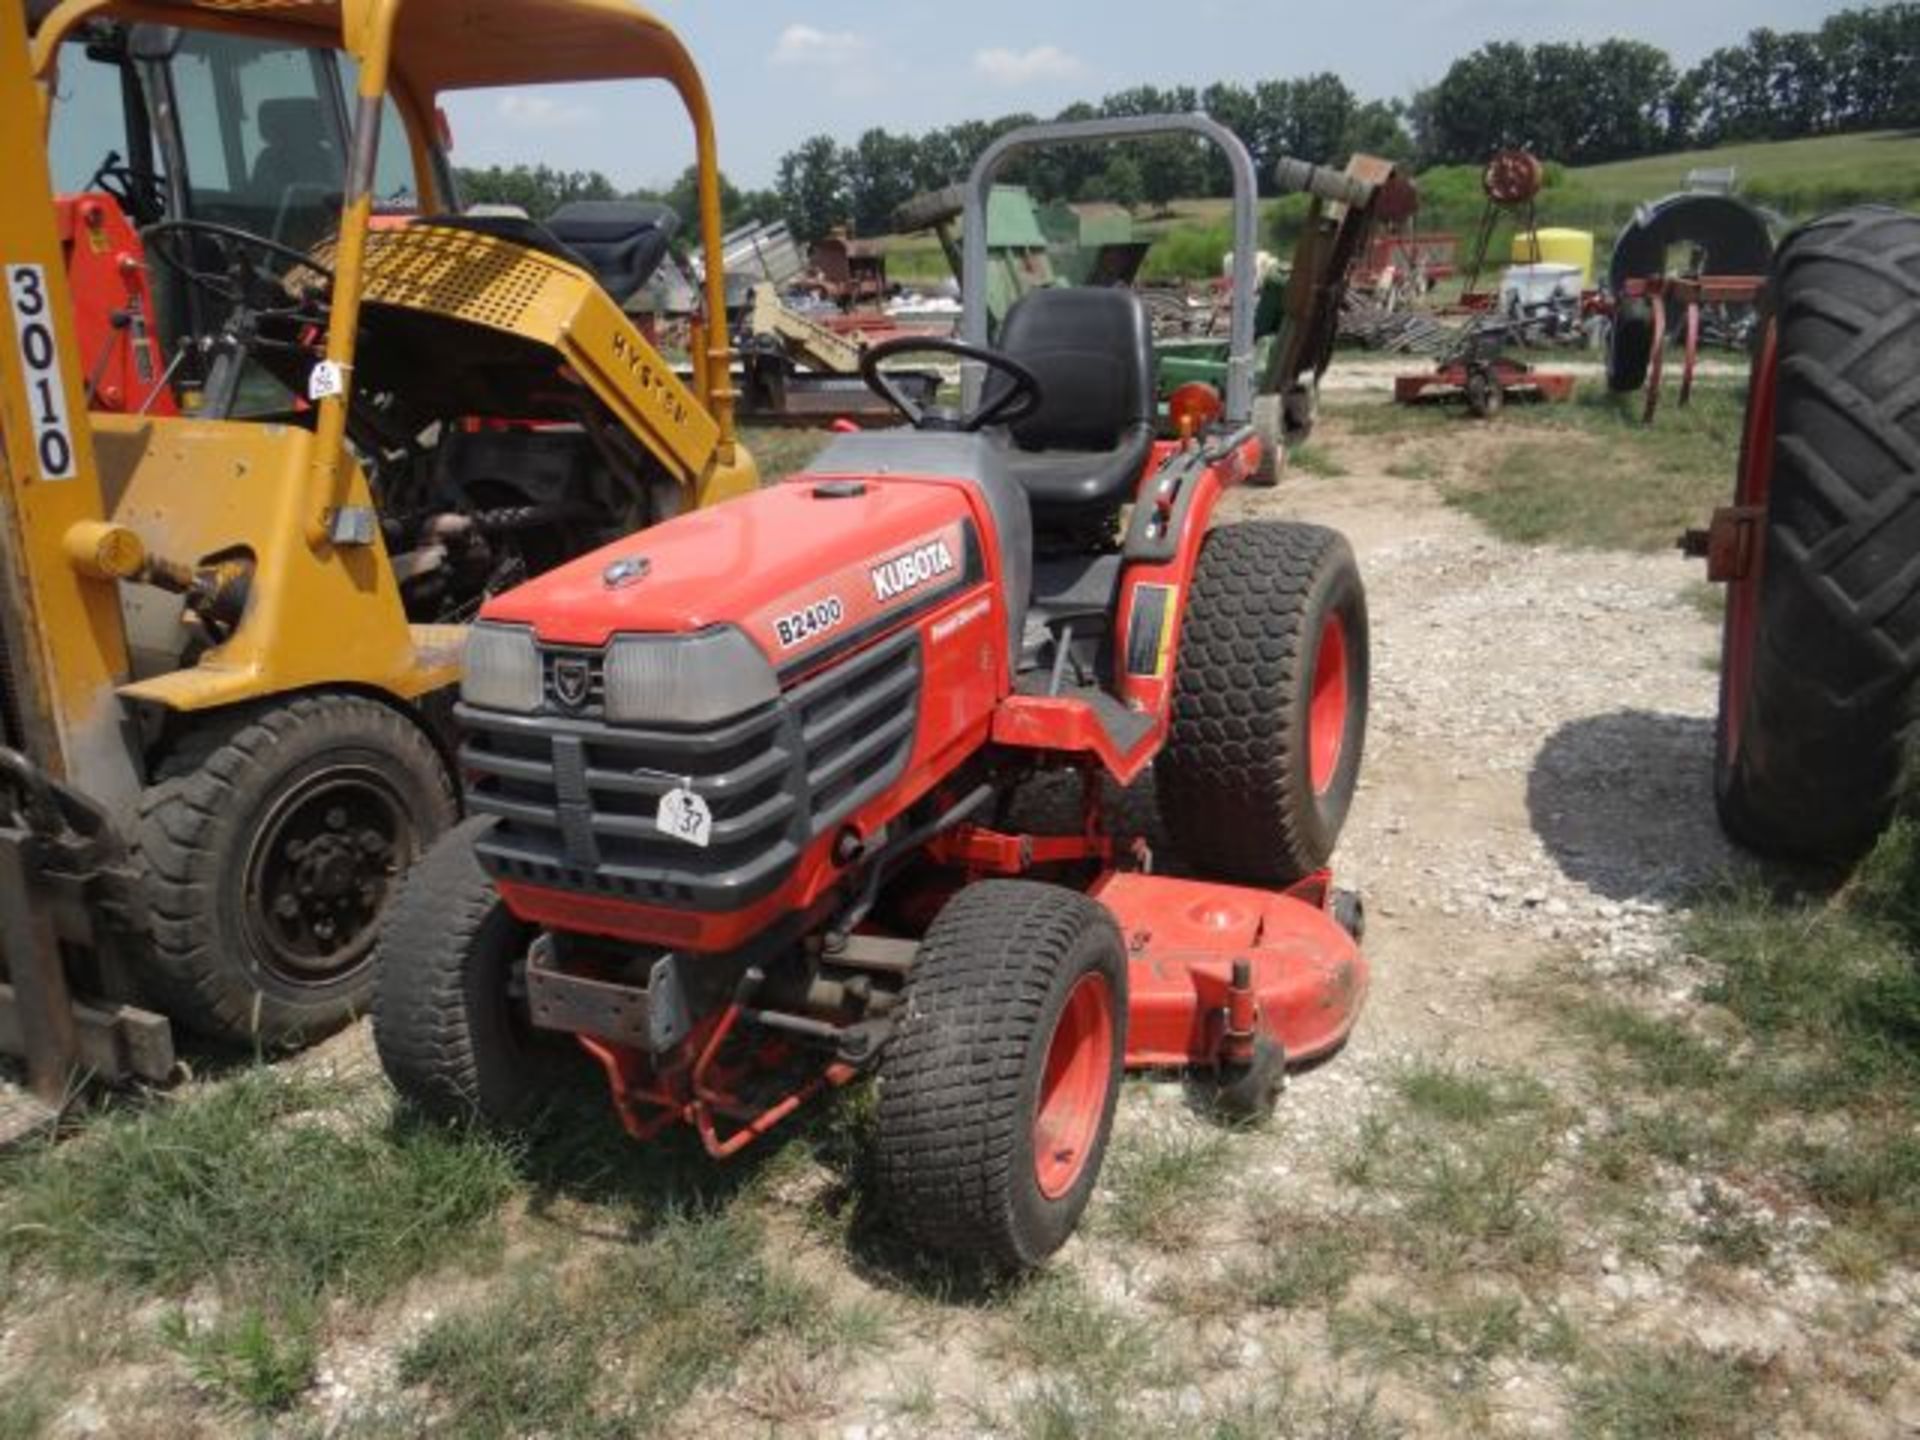 Kubota B2400 Compact Tractor 1475 hrs, MFWD, 60" Mid Mount Deck, 3pt, 540 PTO, Hydro